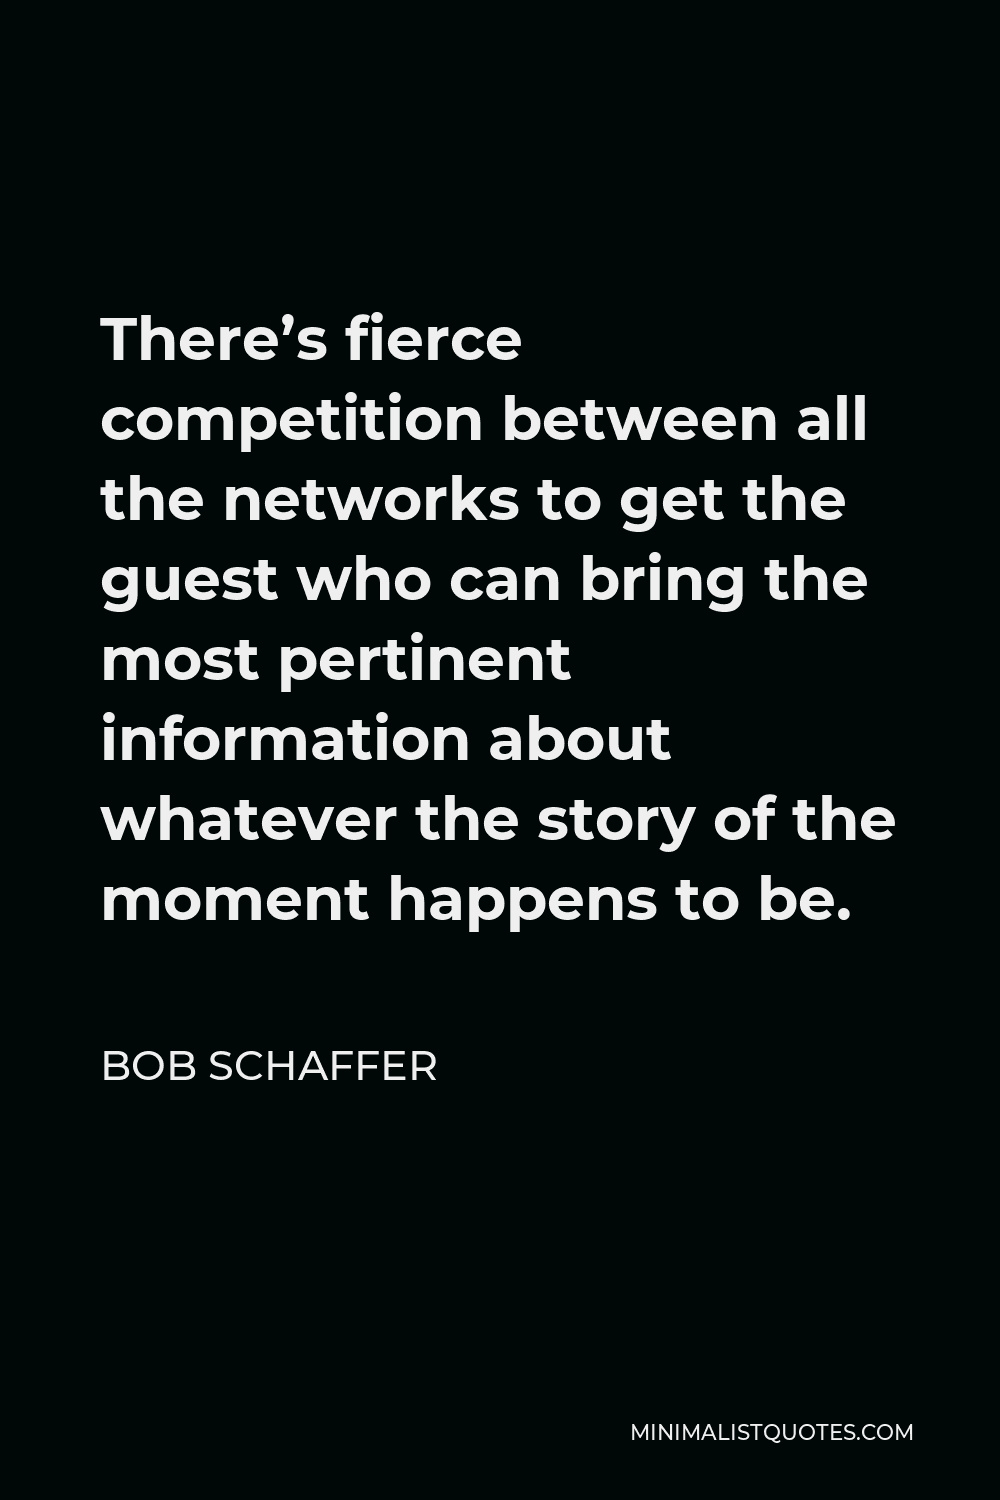 Bob Schaffer Quote - There’s fierce competition between all the networks to get the guest who can bring the most pertinent information about whatever the story of the moment happens to be.